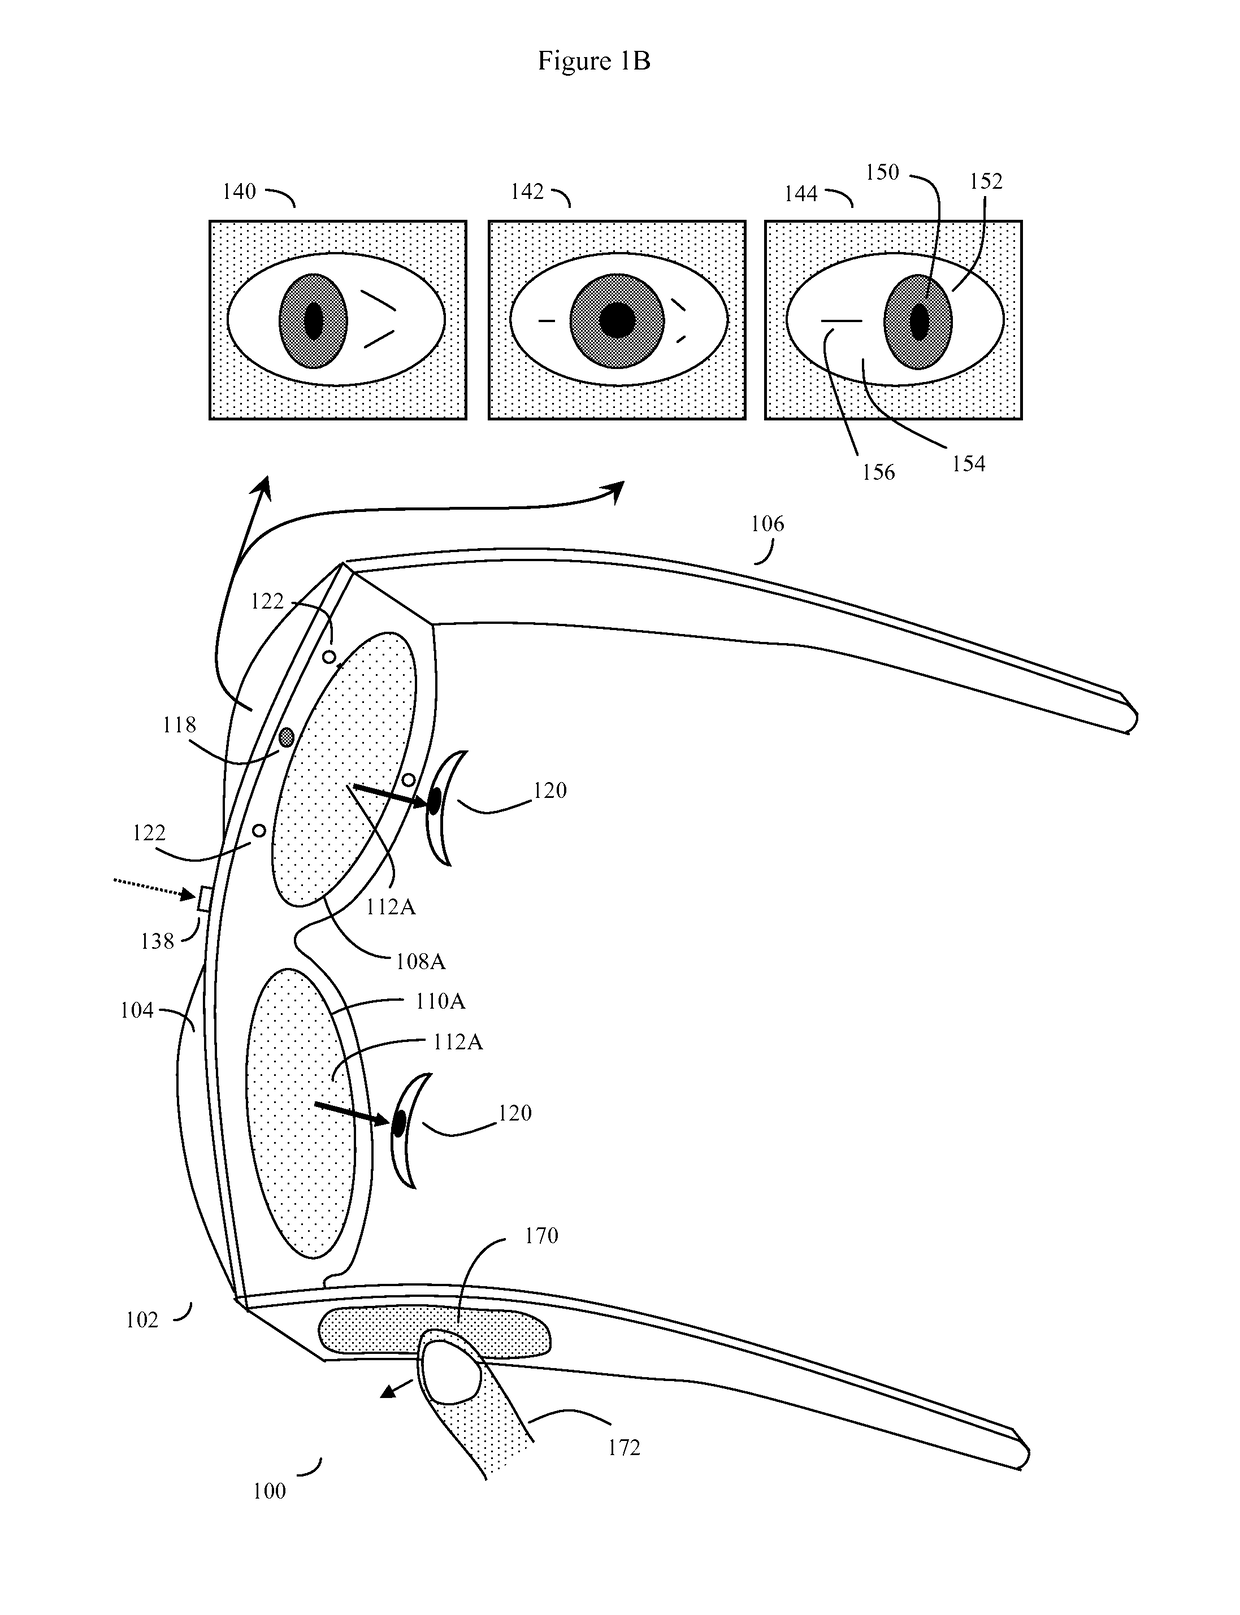 Eye-wearable device user interface and method